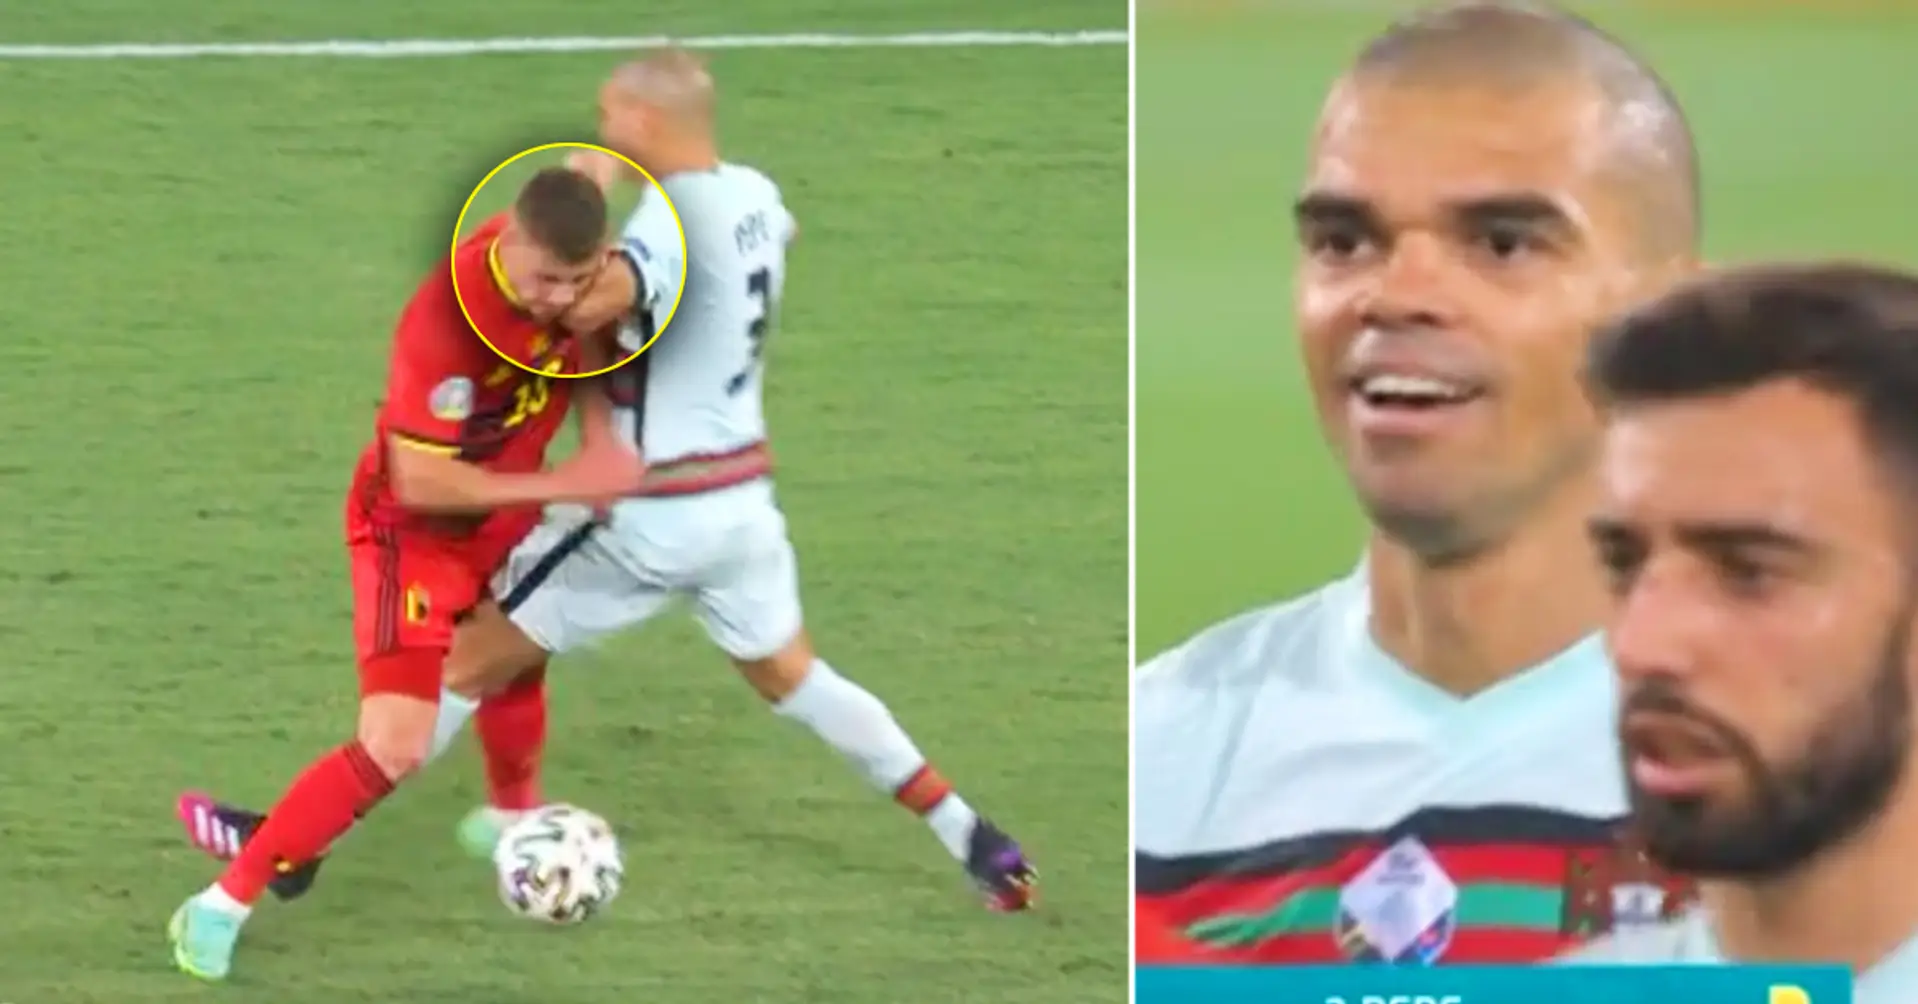 Animal aggression. Pepe criticised for brutal foul during Portugal–Belgium match